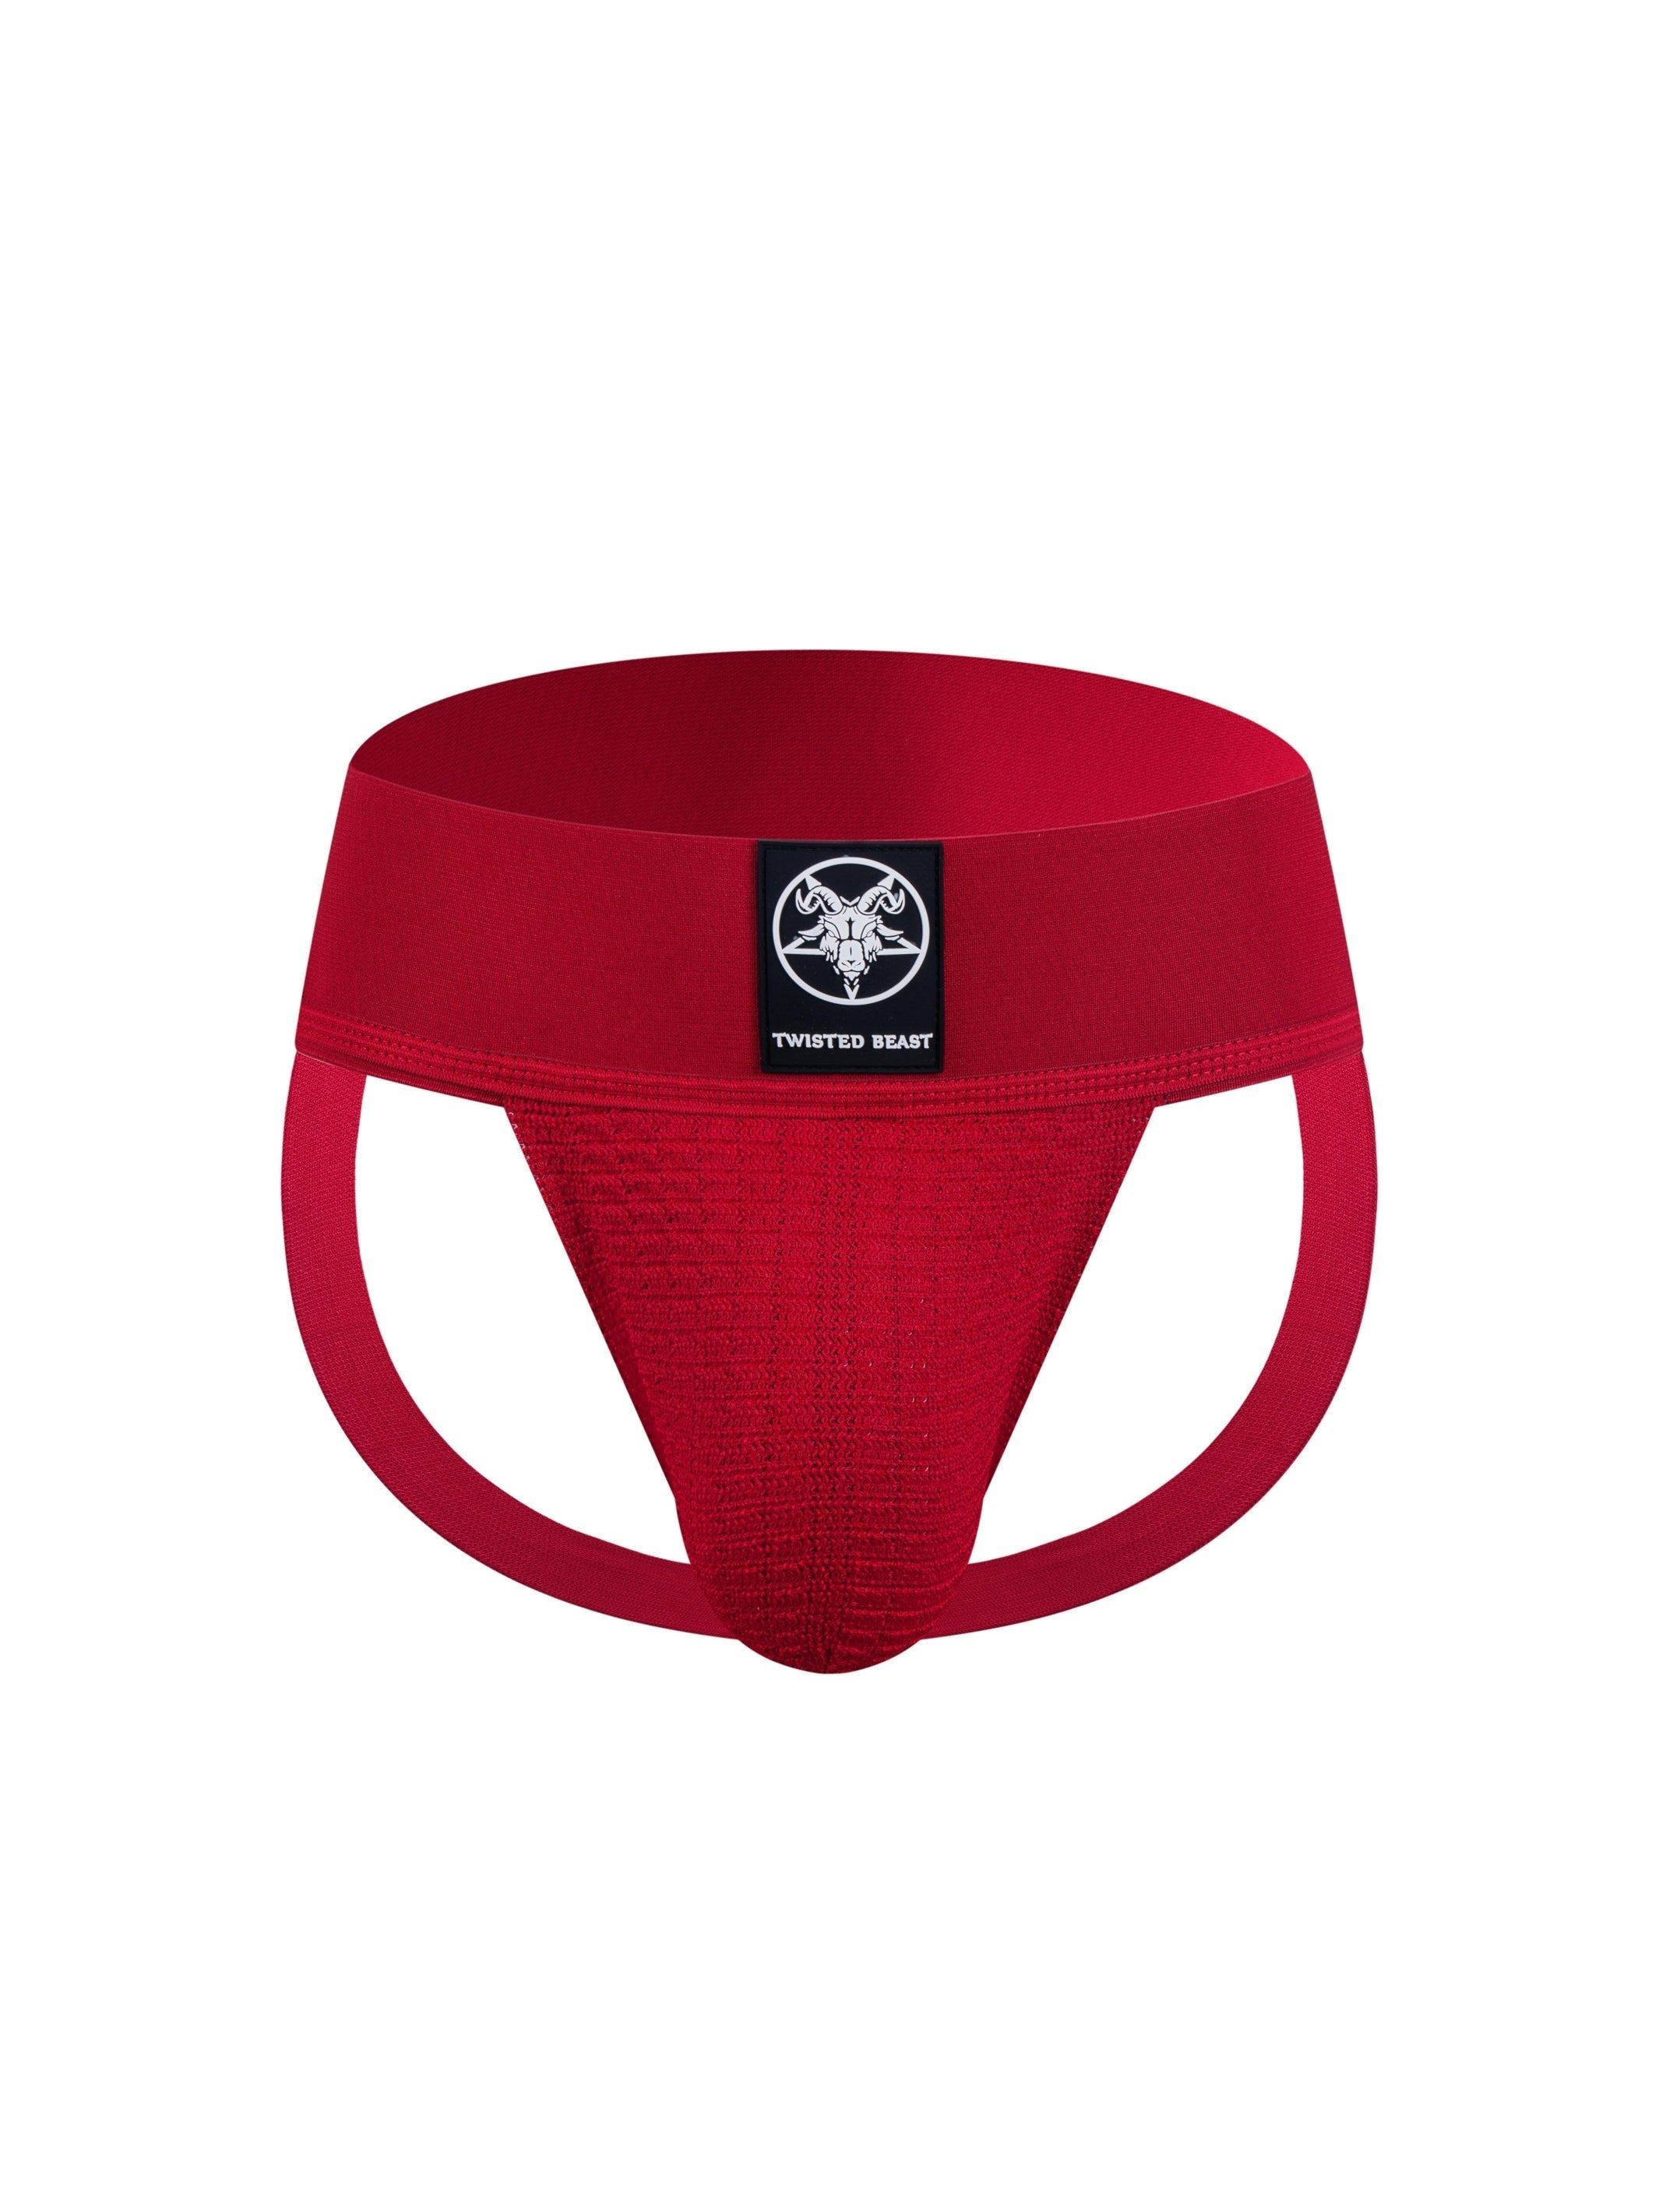 A photo of a red mesh Locker Jock from the front.